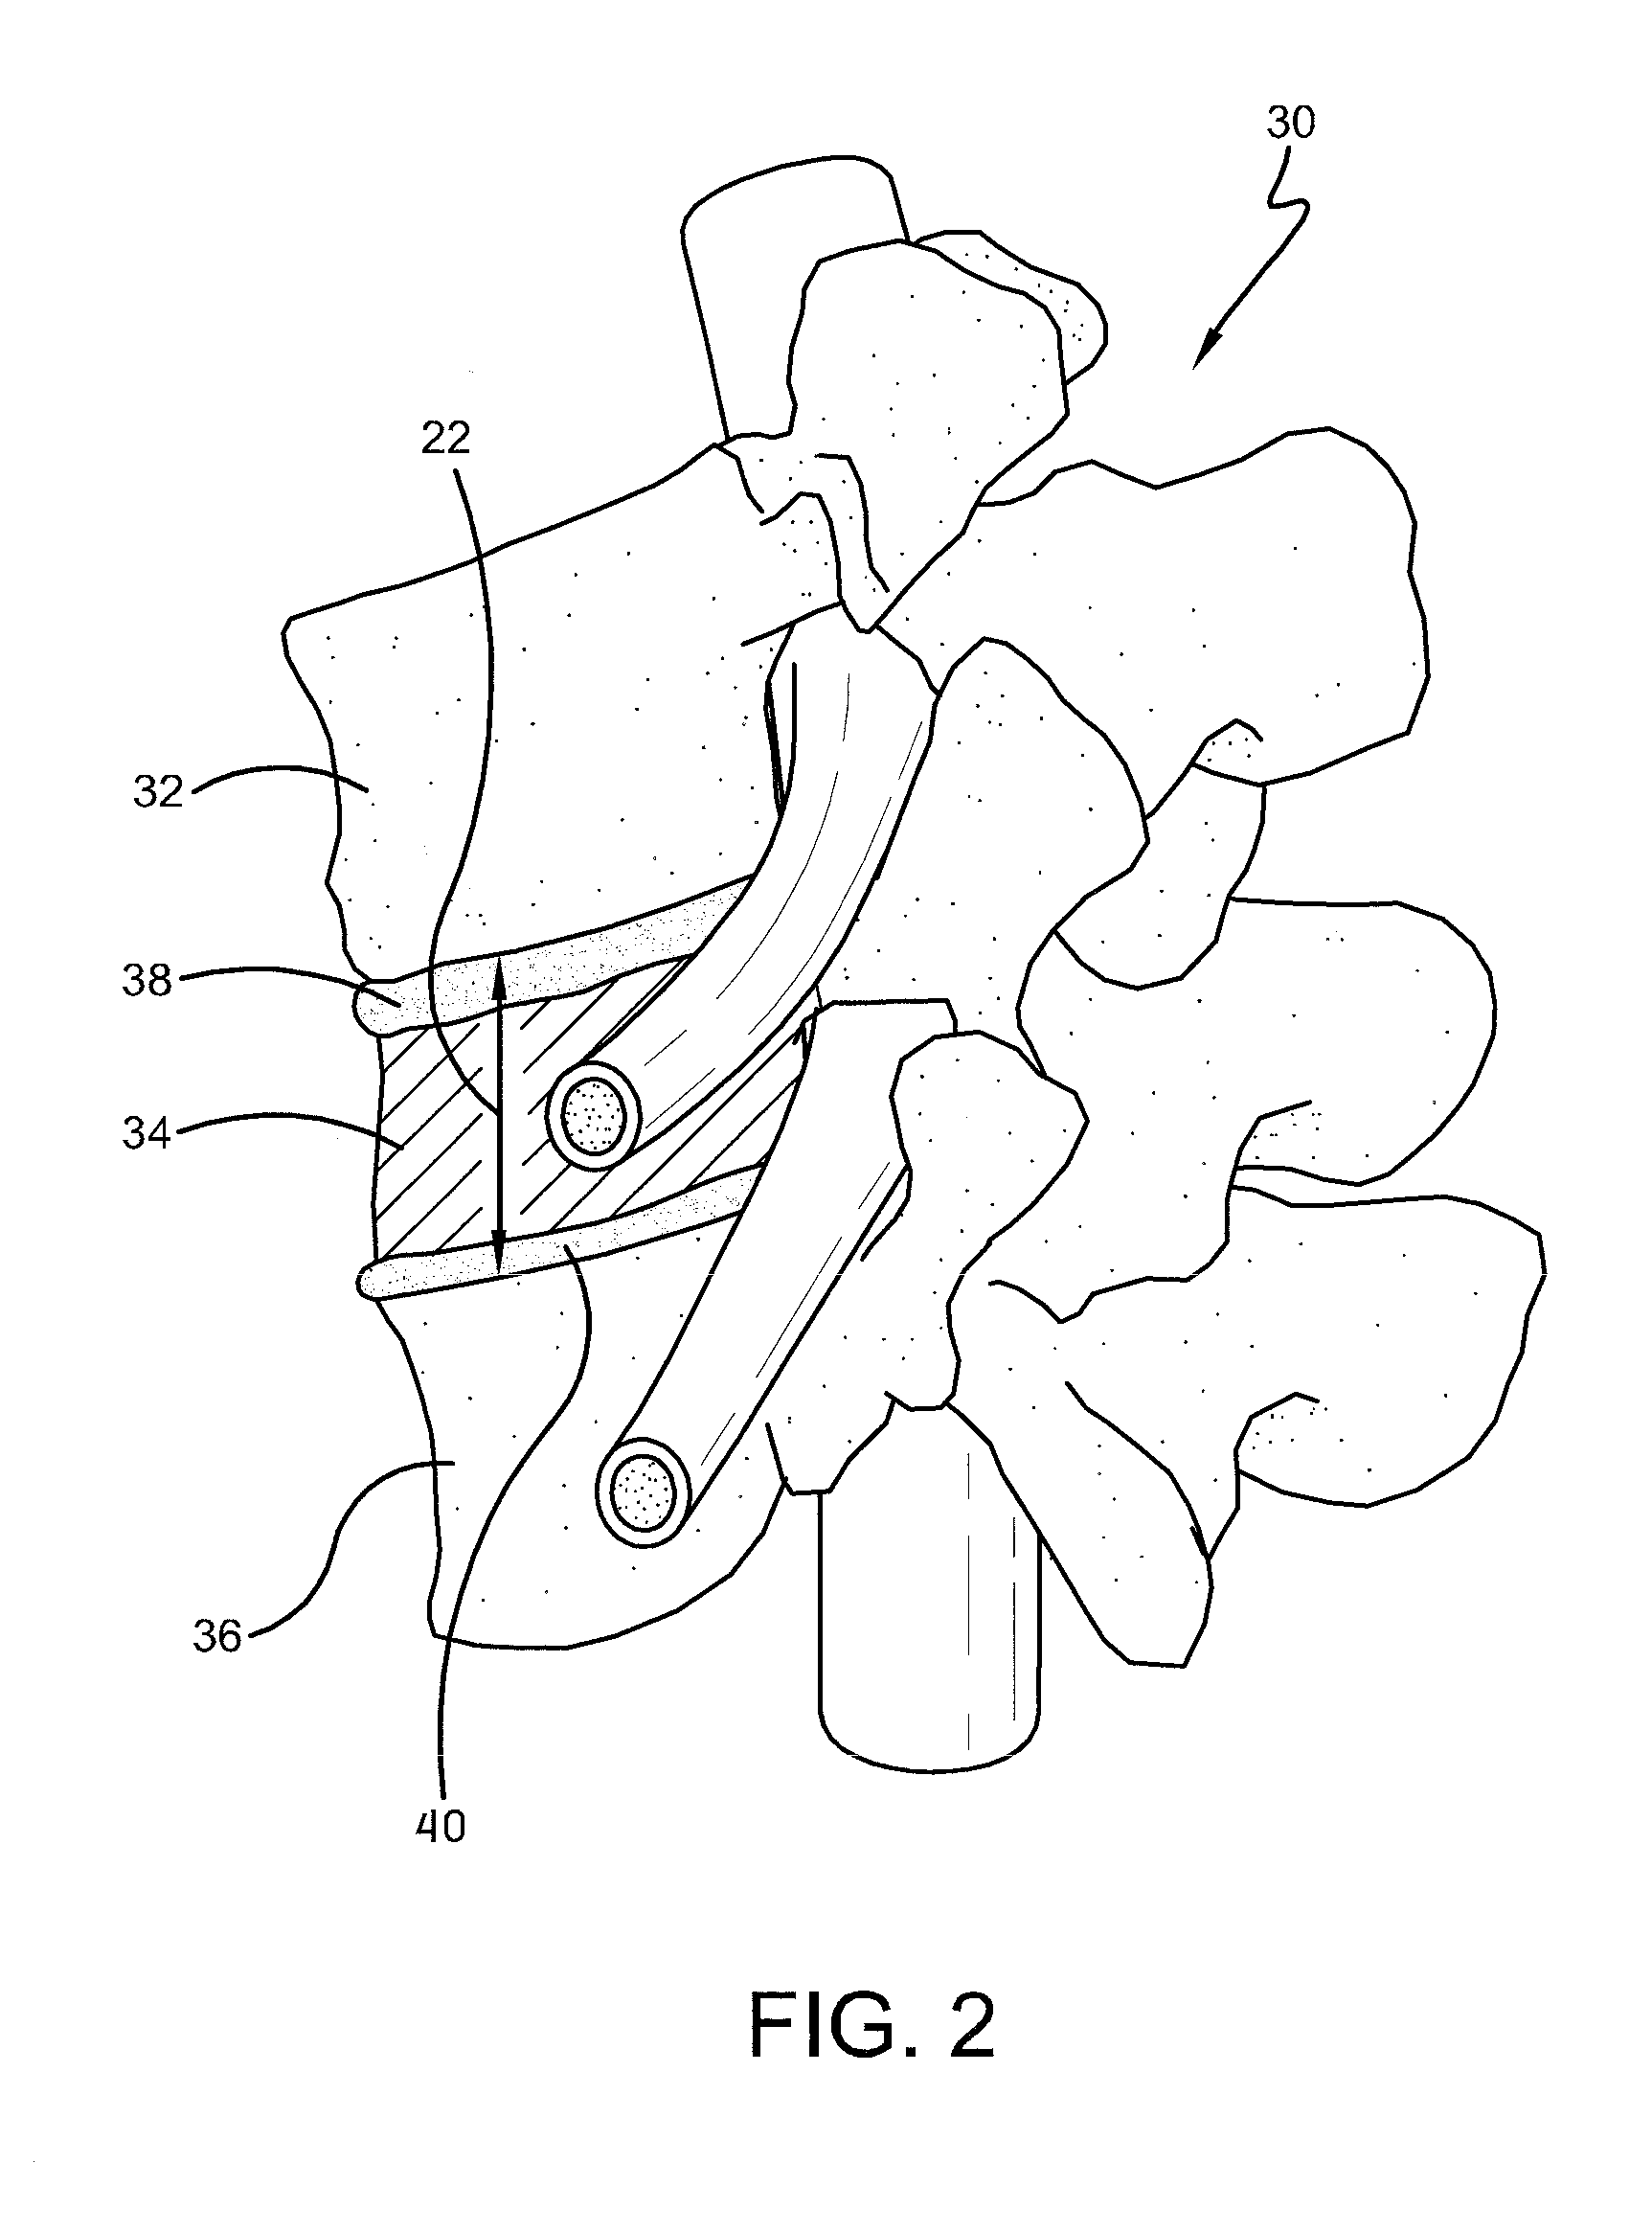 Spine surgery method and implant deployment